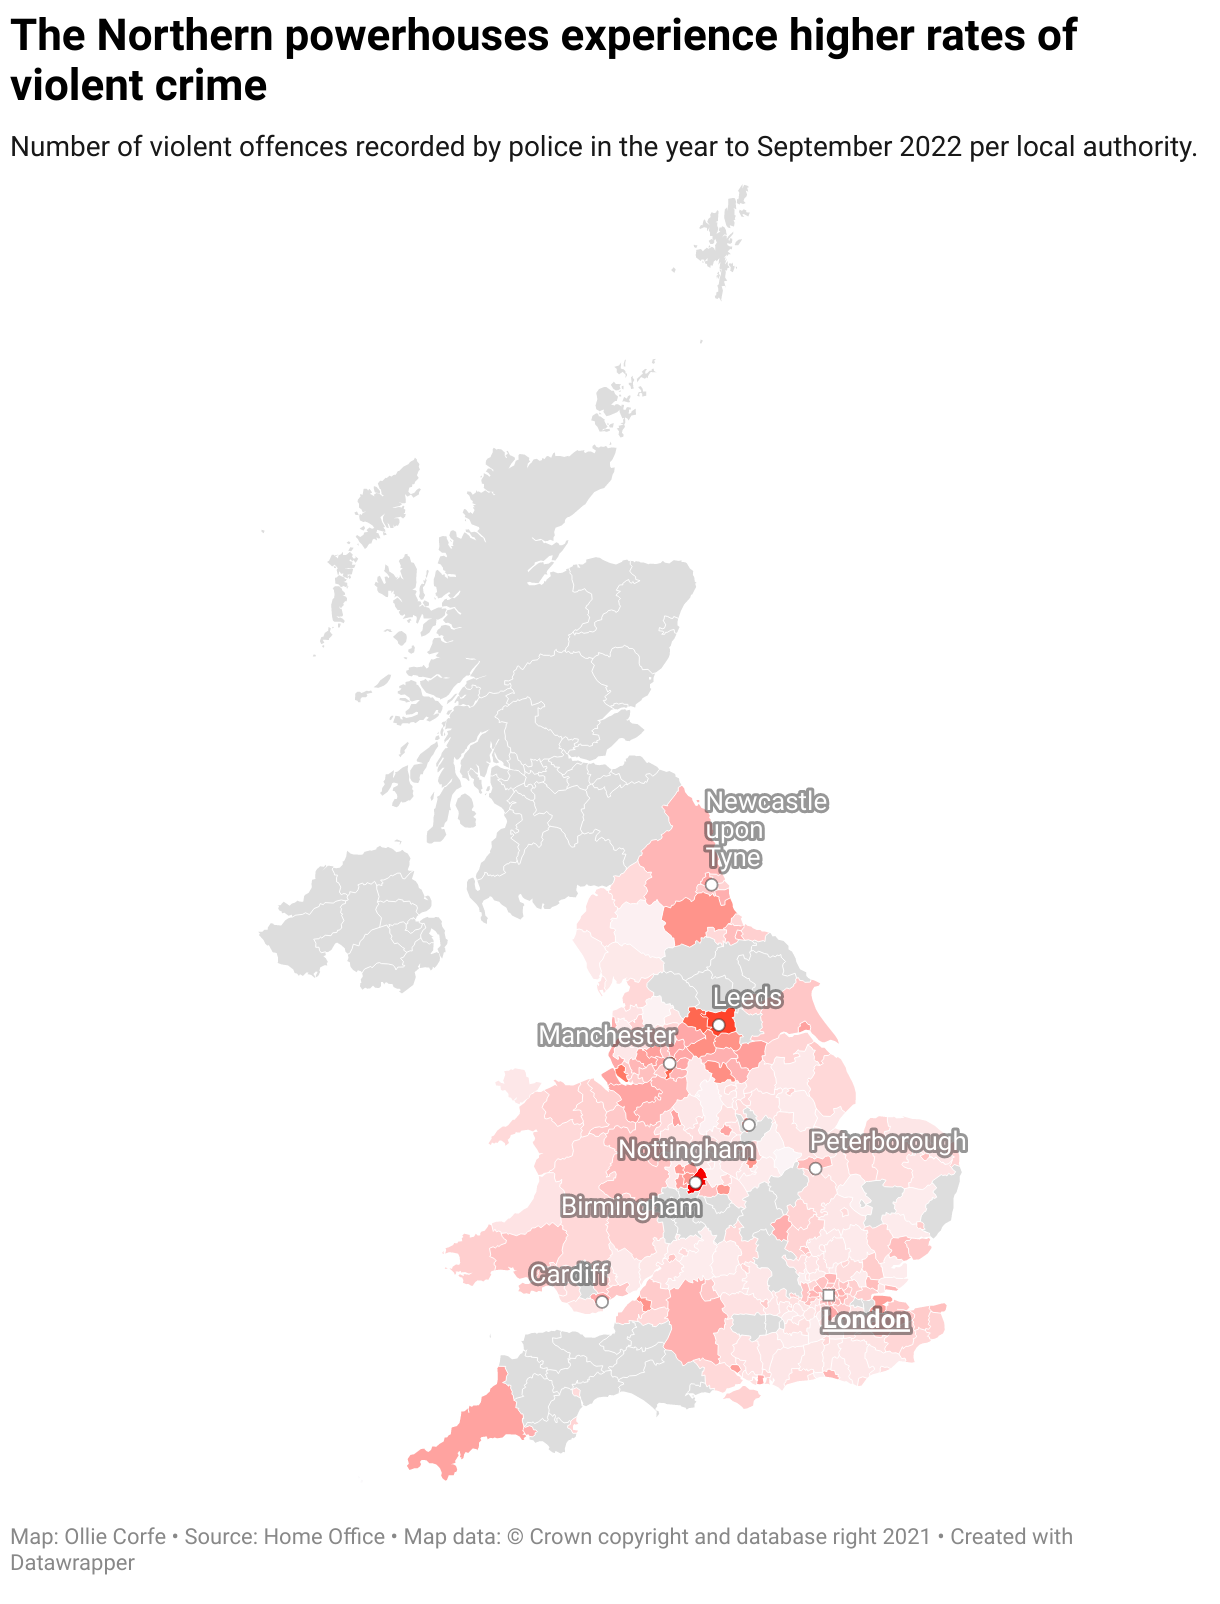 Map of violent crime in the UK.